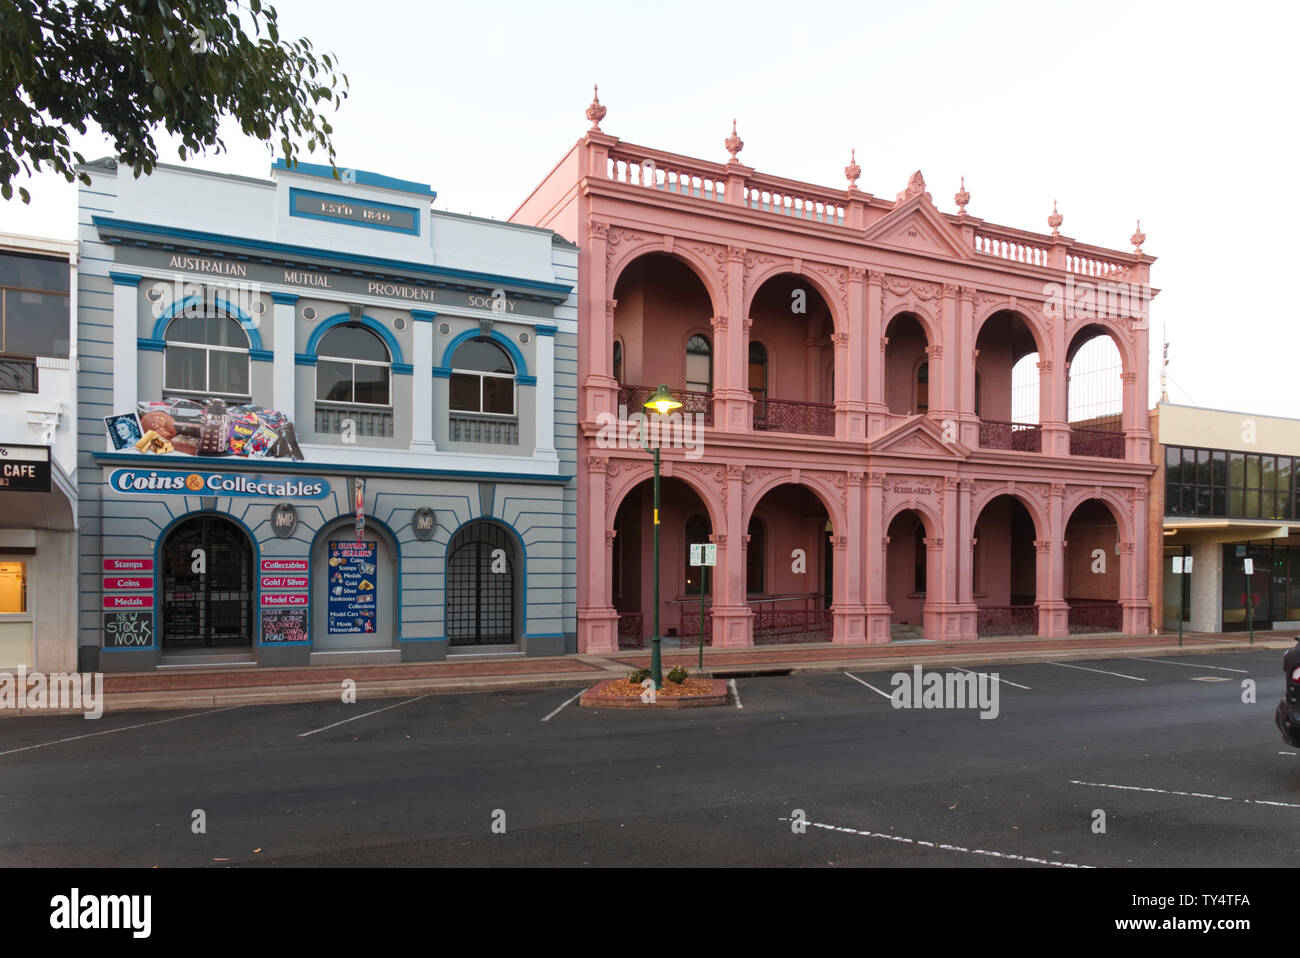 The School of Arts two storey brick building is possibly the oldest building in Bundaberg still standing Bourbong Street Bundaberg Queensland Australi Stock Photo